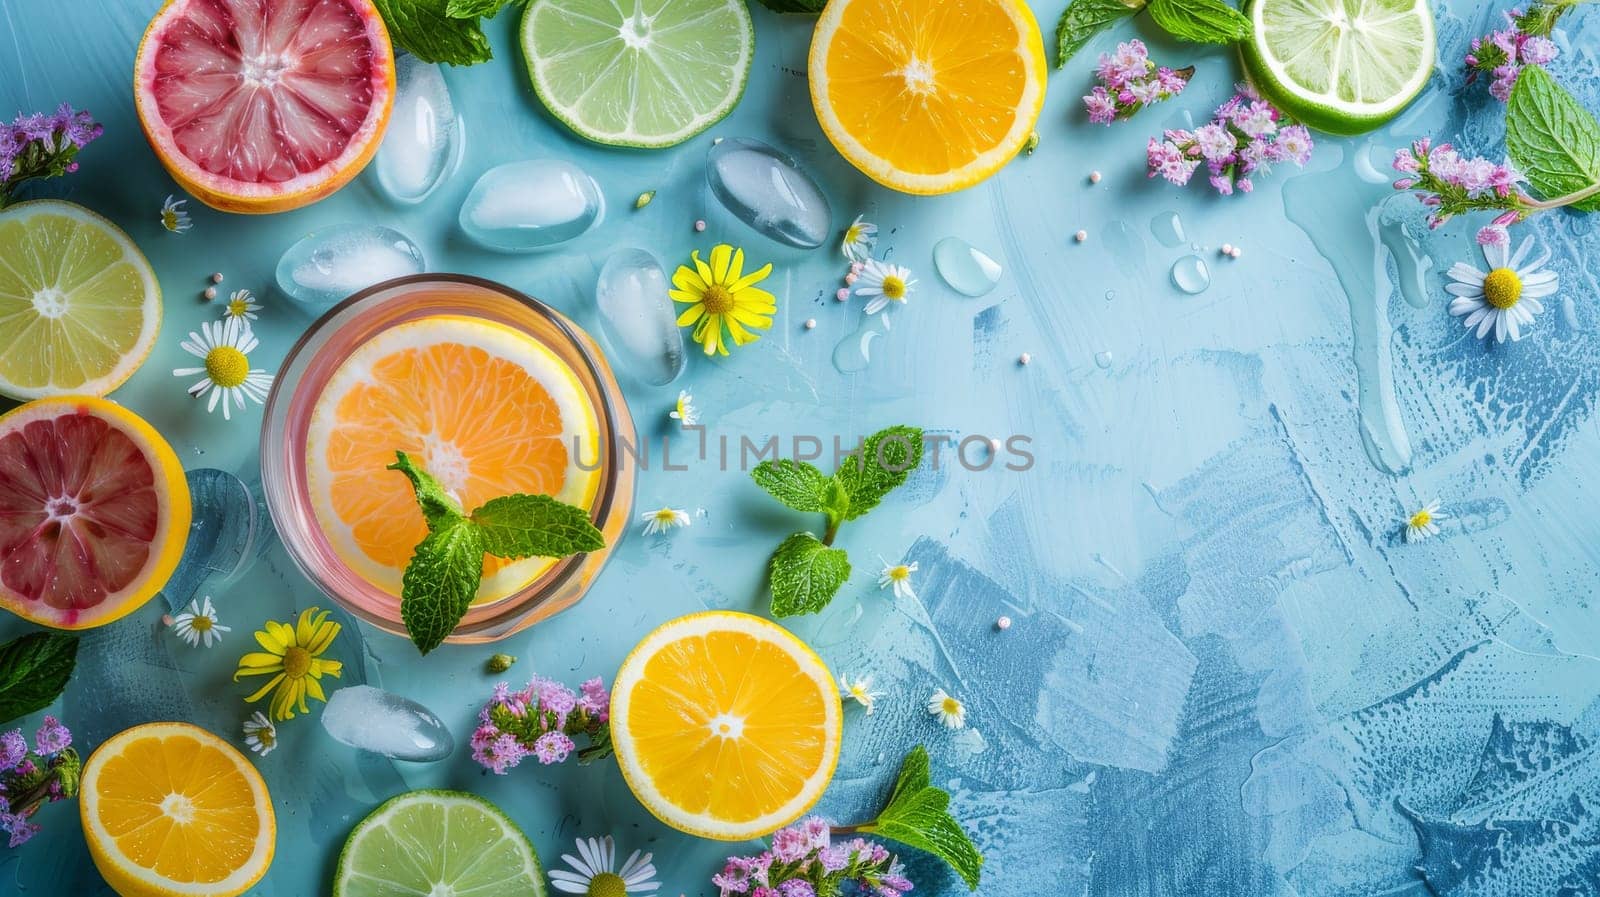 A blue background with a variety of fruits and flowers, including oranges, limes, and mint